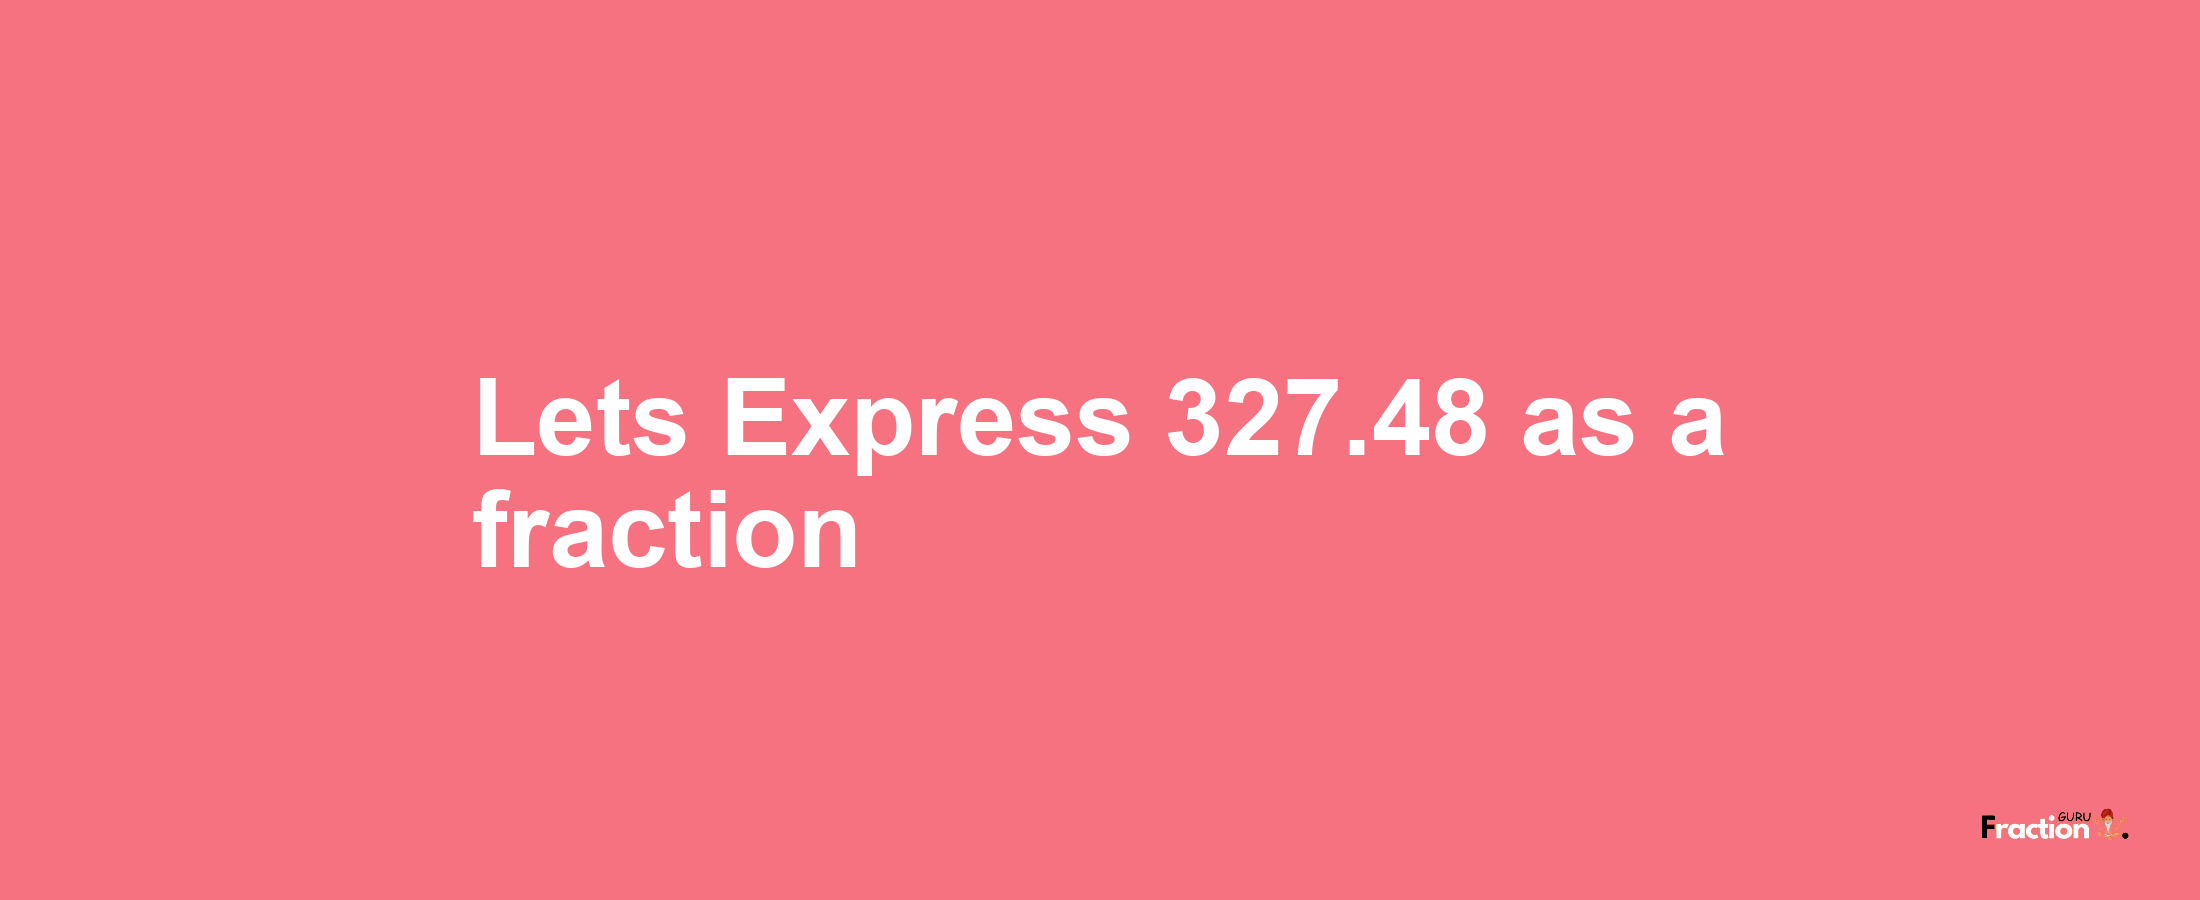 Lets Express 327.48 as afraction